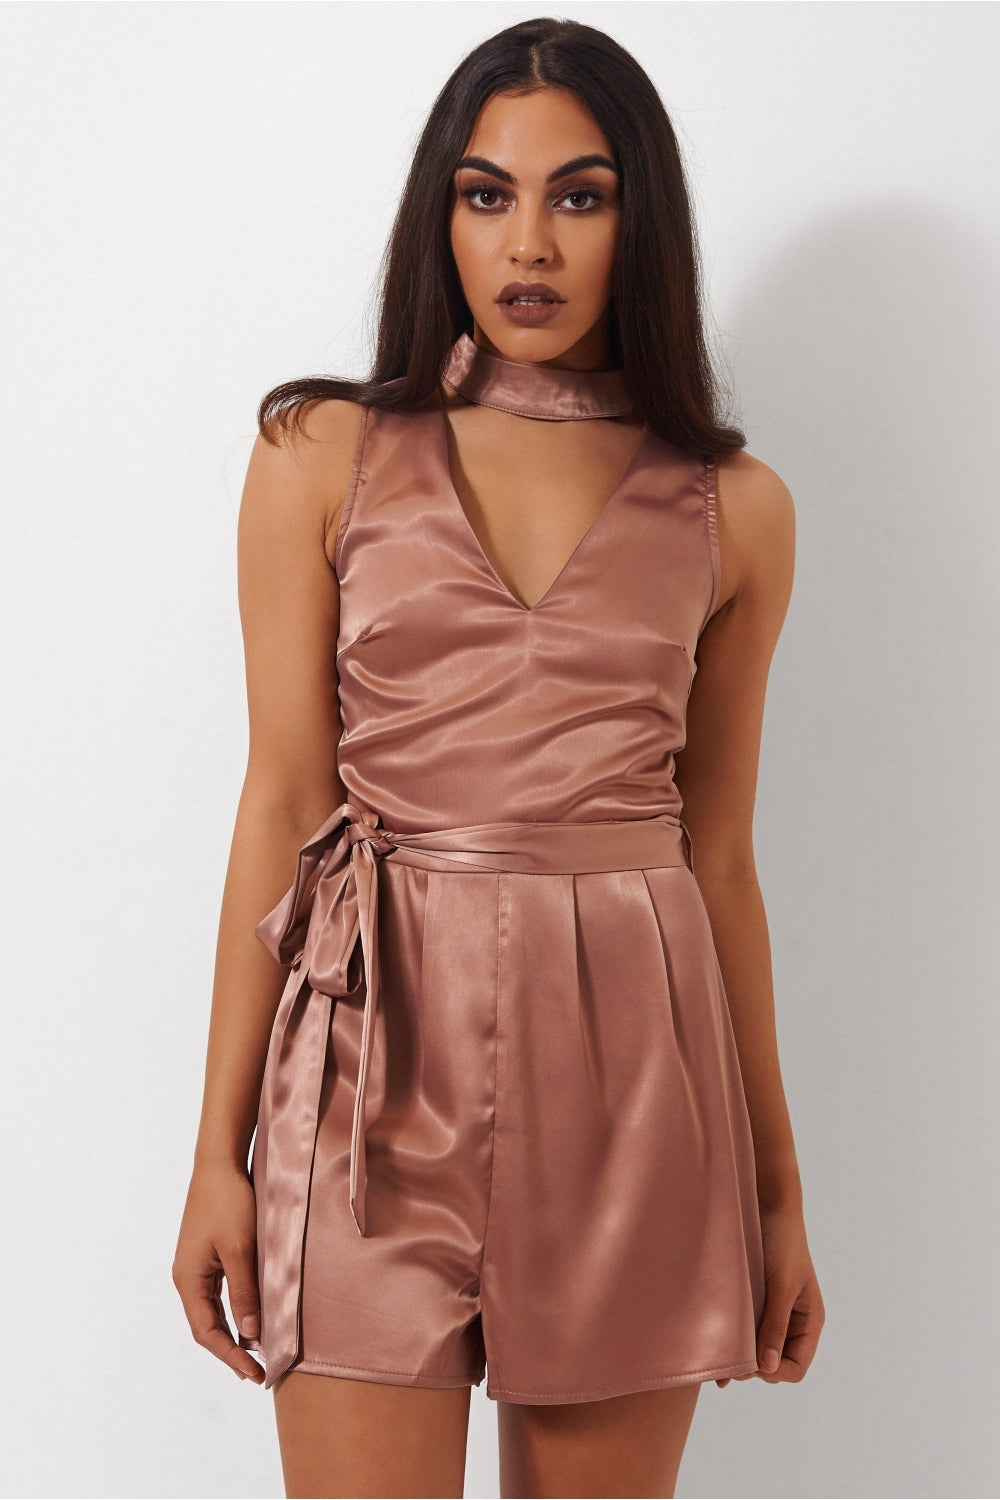 Lilly Nude Satin Choker Playsuit